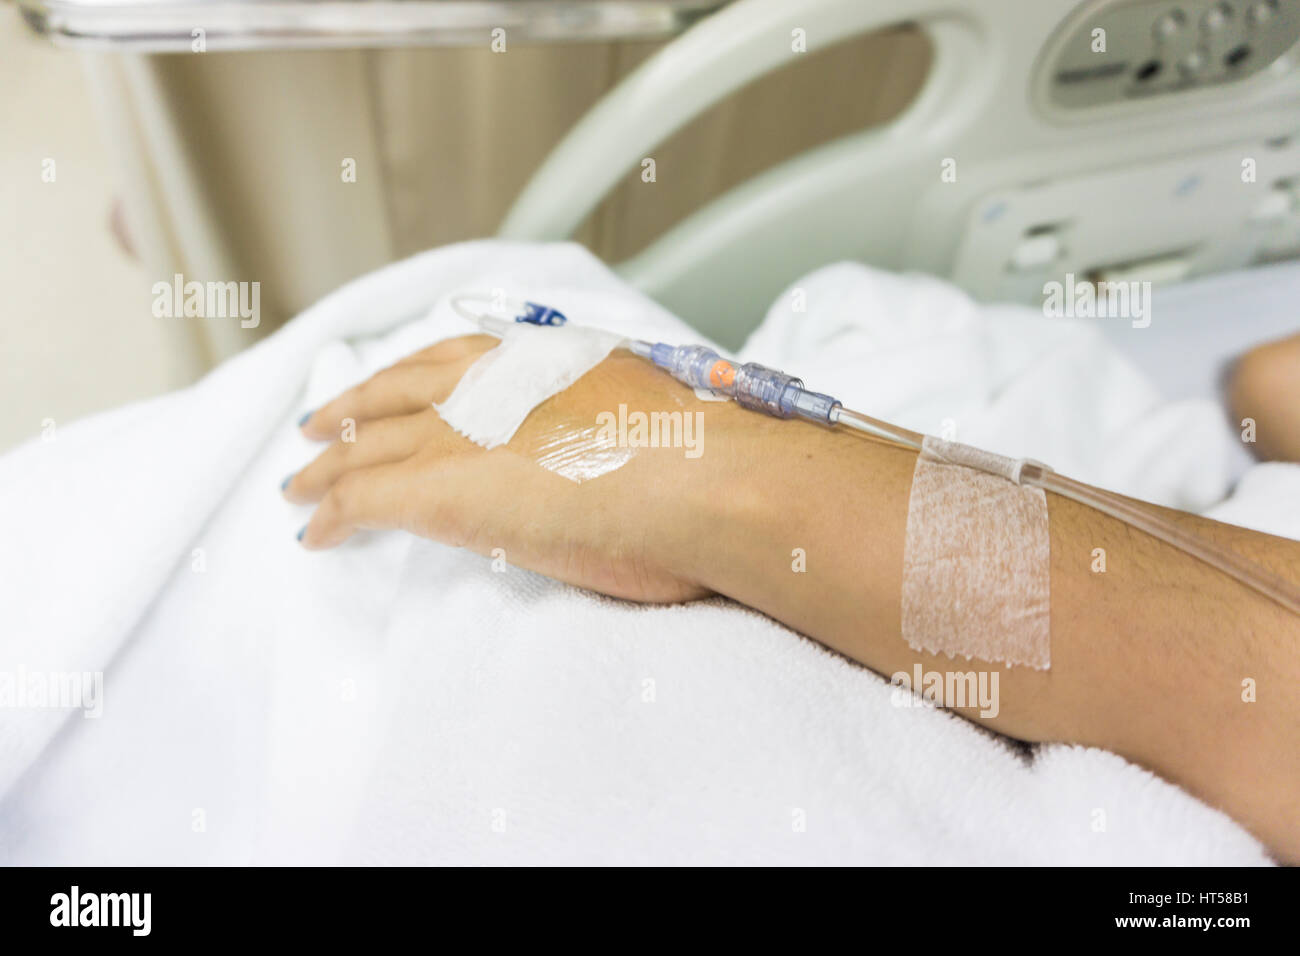 IV in a Hospital Room. Three IV's hand on a stand in a hospital room ,  #AFF, #Room, #hand, #IV, #Hospital, #room #ad